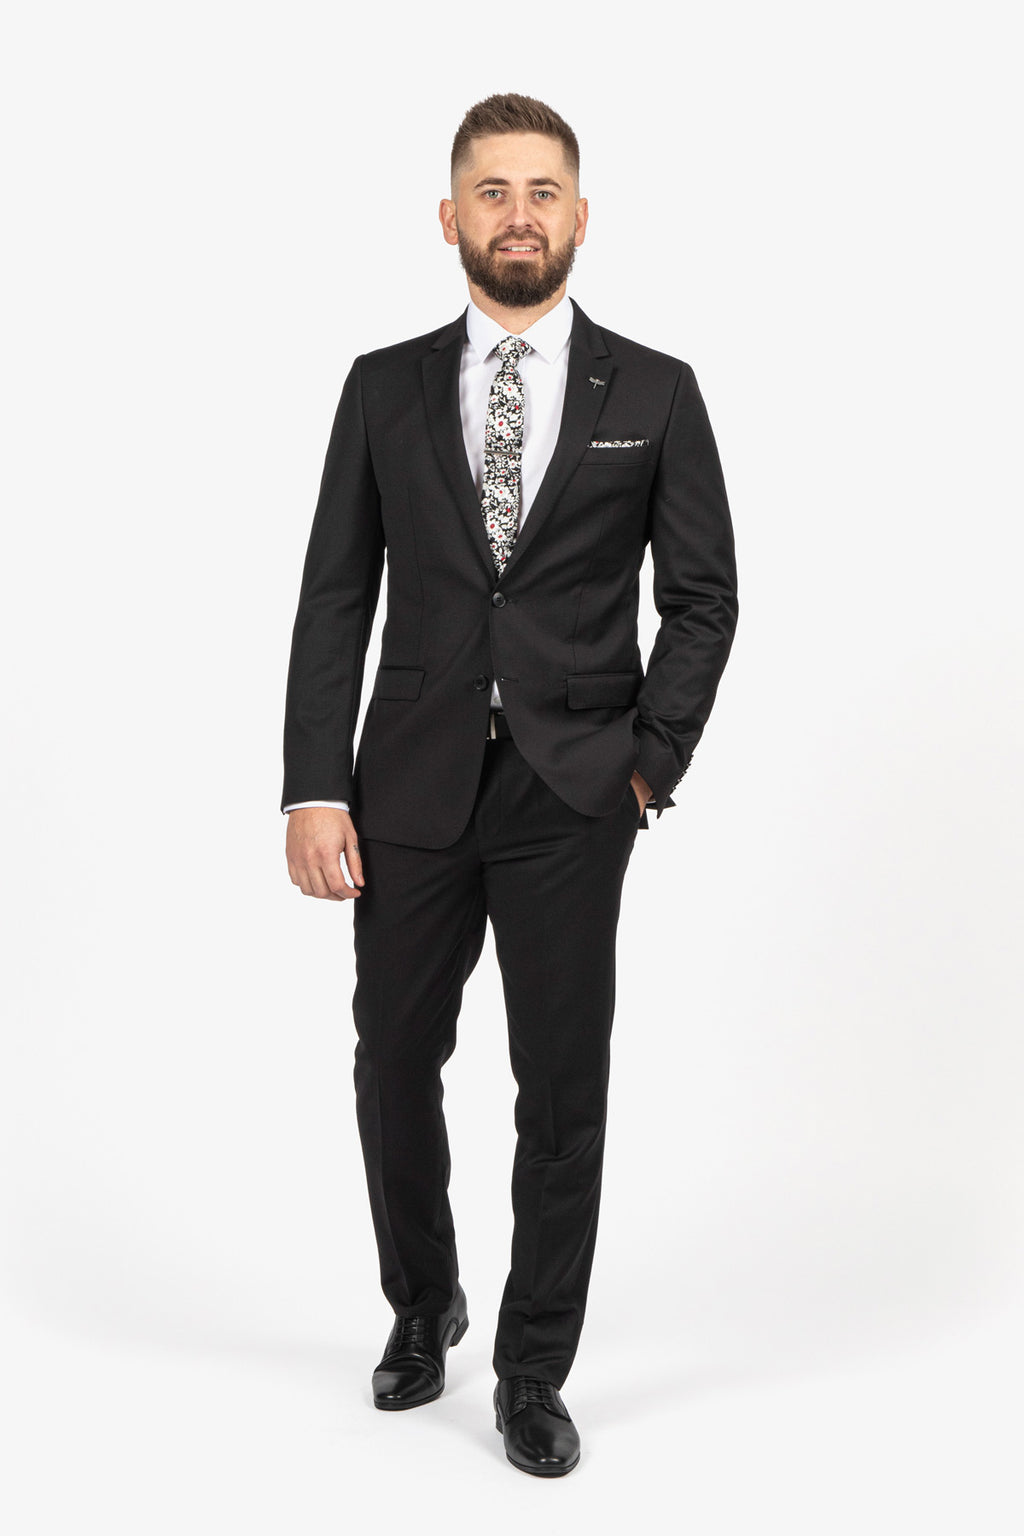 Gibson | Lithium Suit Jacket Mens Suits Online – Peter Shearer Menswear